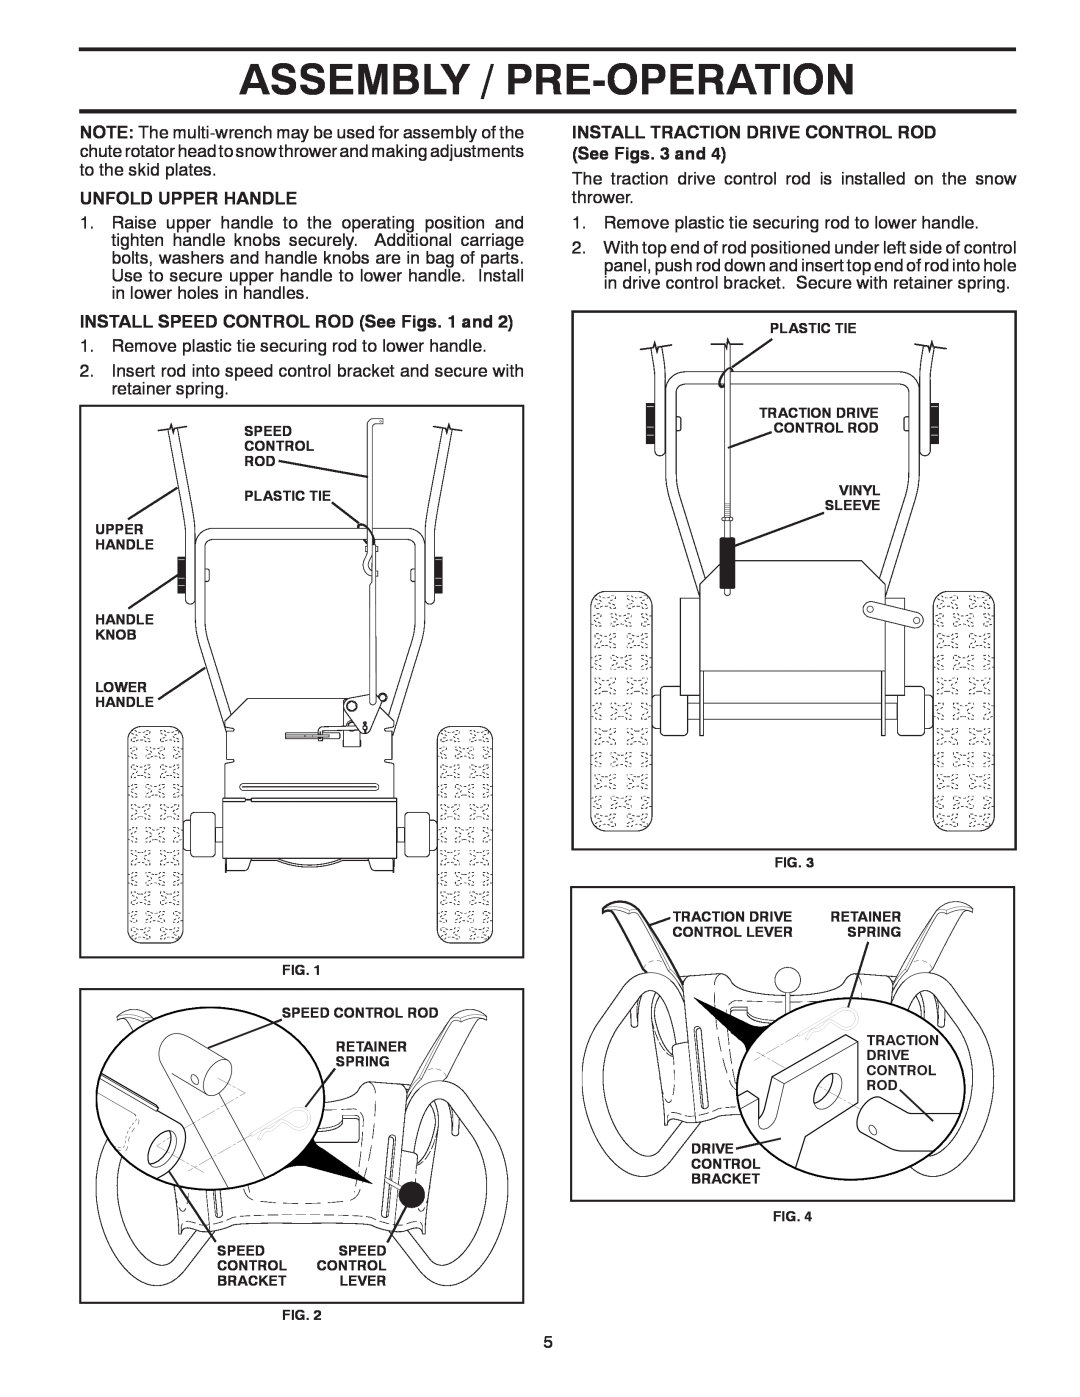 Poulan 96198002603 Assembly / Pre-Operation, Unfold Upper Handle, INSTALL SPEED CONTROL ROD See Figs. 1 and, Plastic Tie 